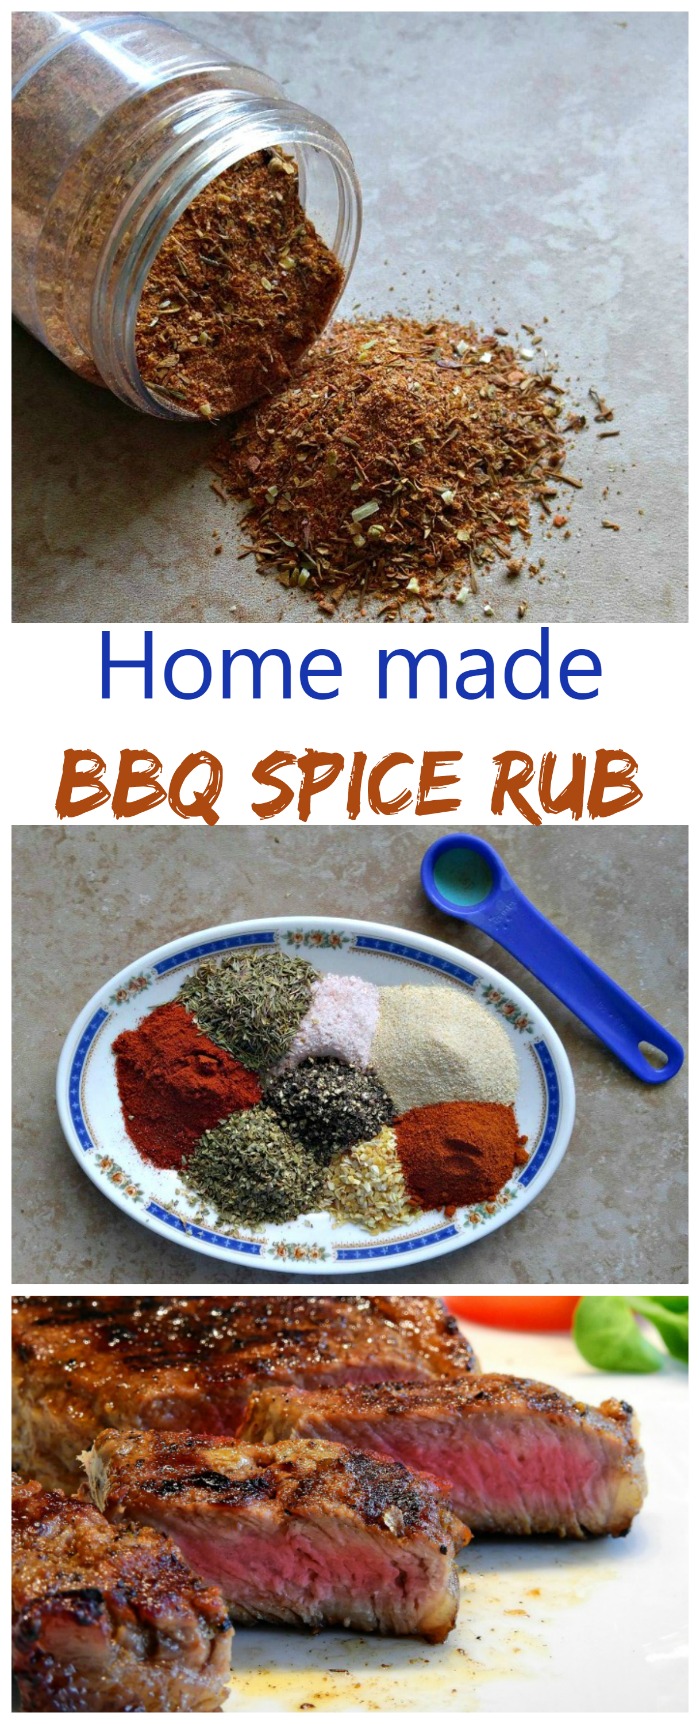 This spice rub is simple to make and makes any meat taste great on the grill. Make some today!